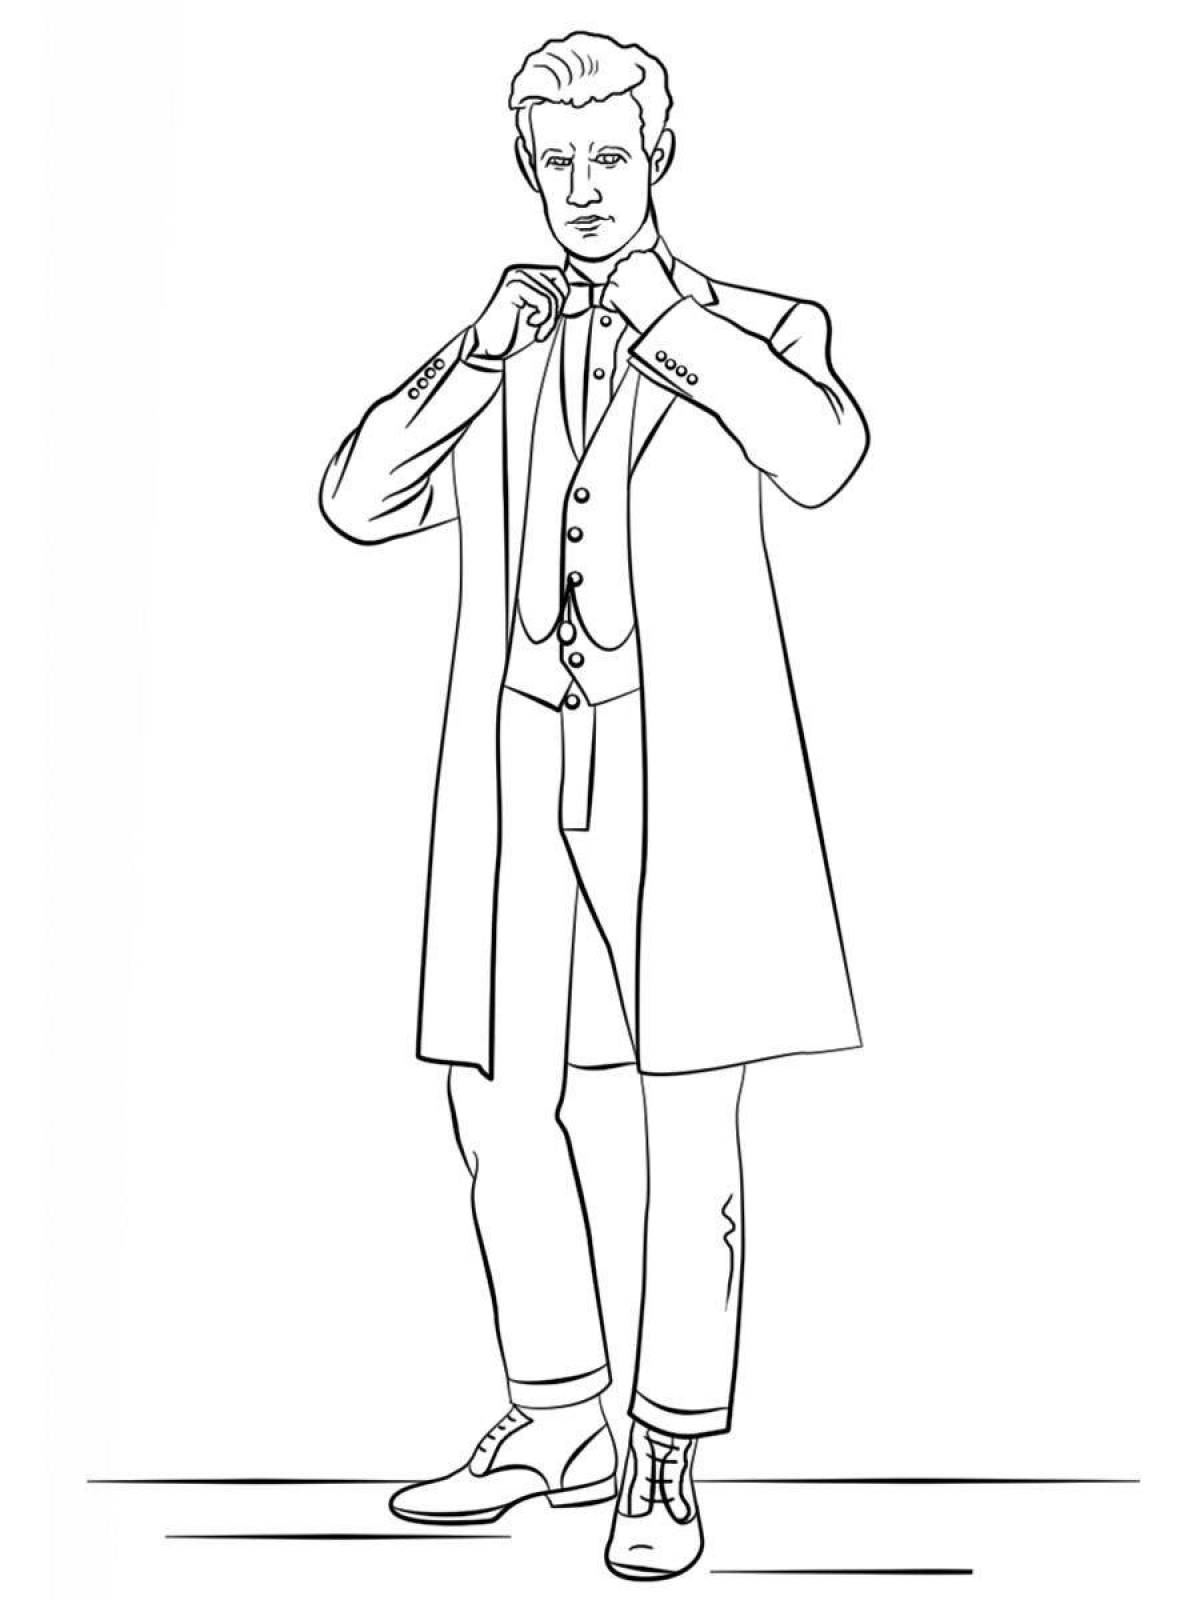 Impressive doctor who coloring book